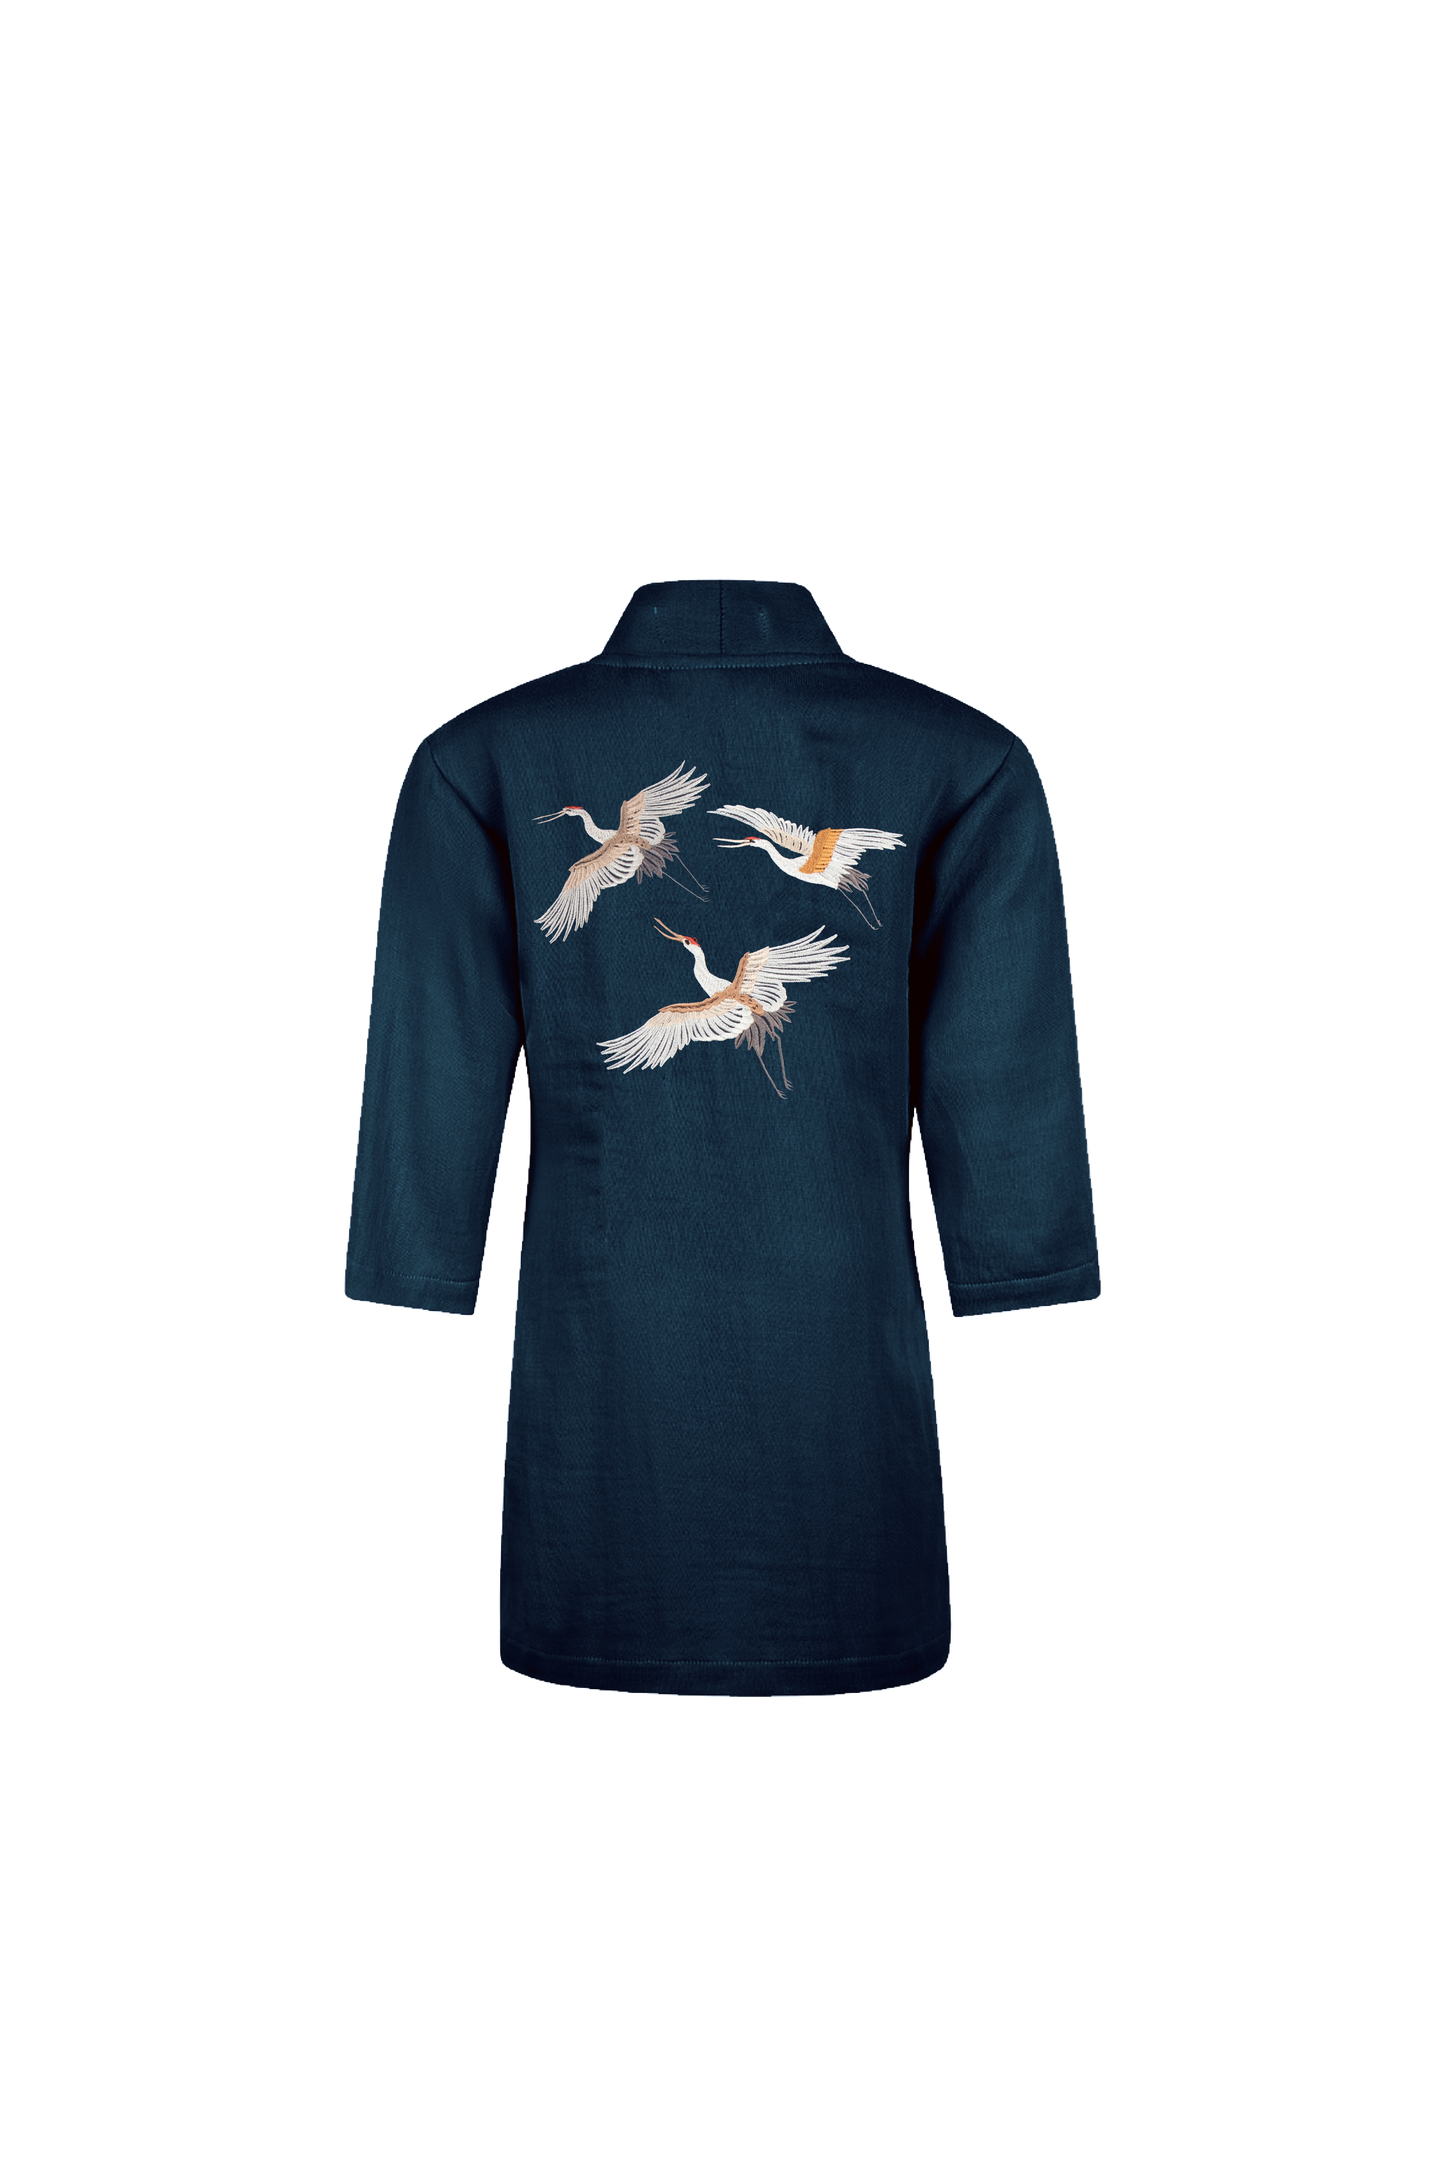 Hammam34 Dark Blue kids kimono with flying cranes embroidery detail on the back (2-4 years)